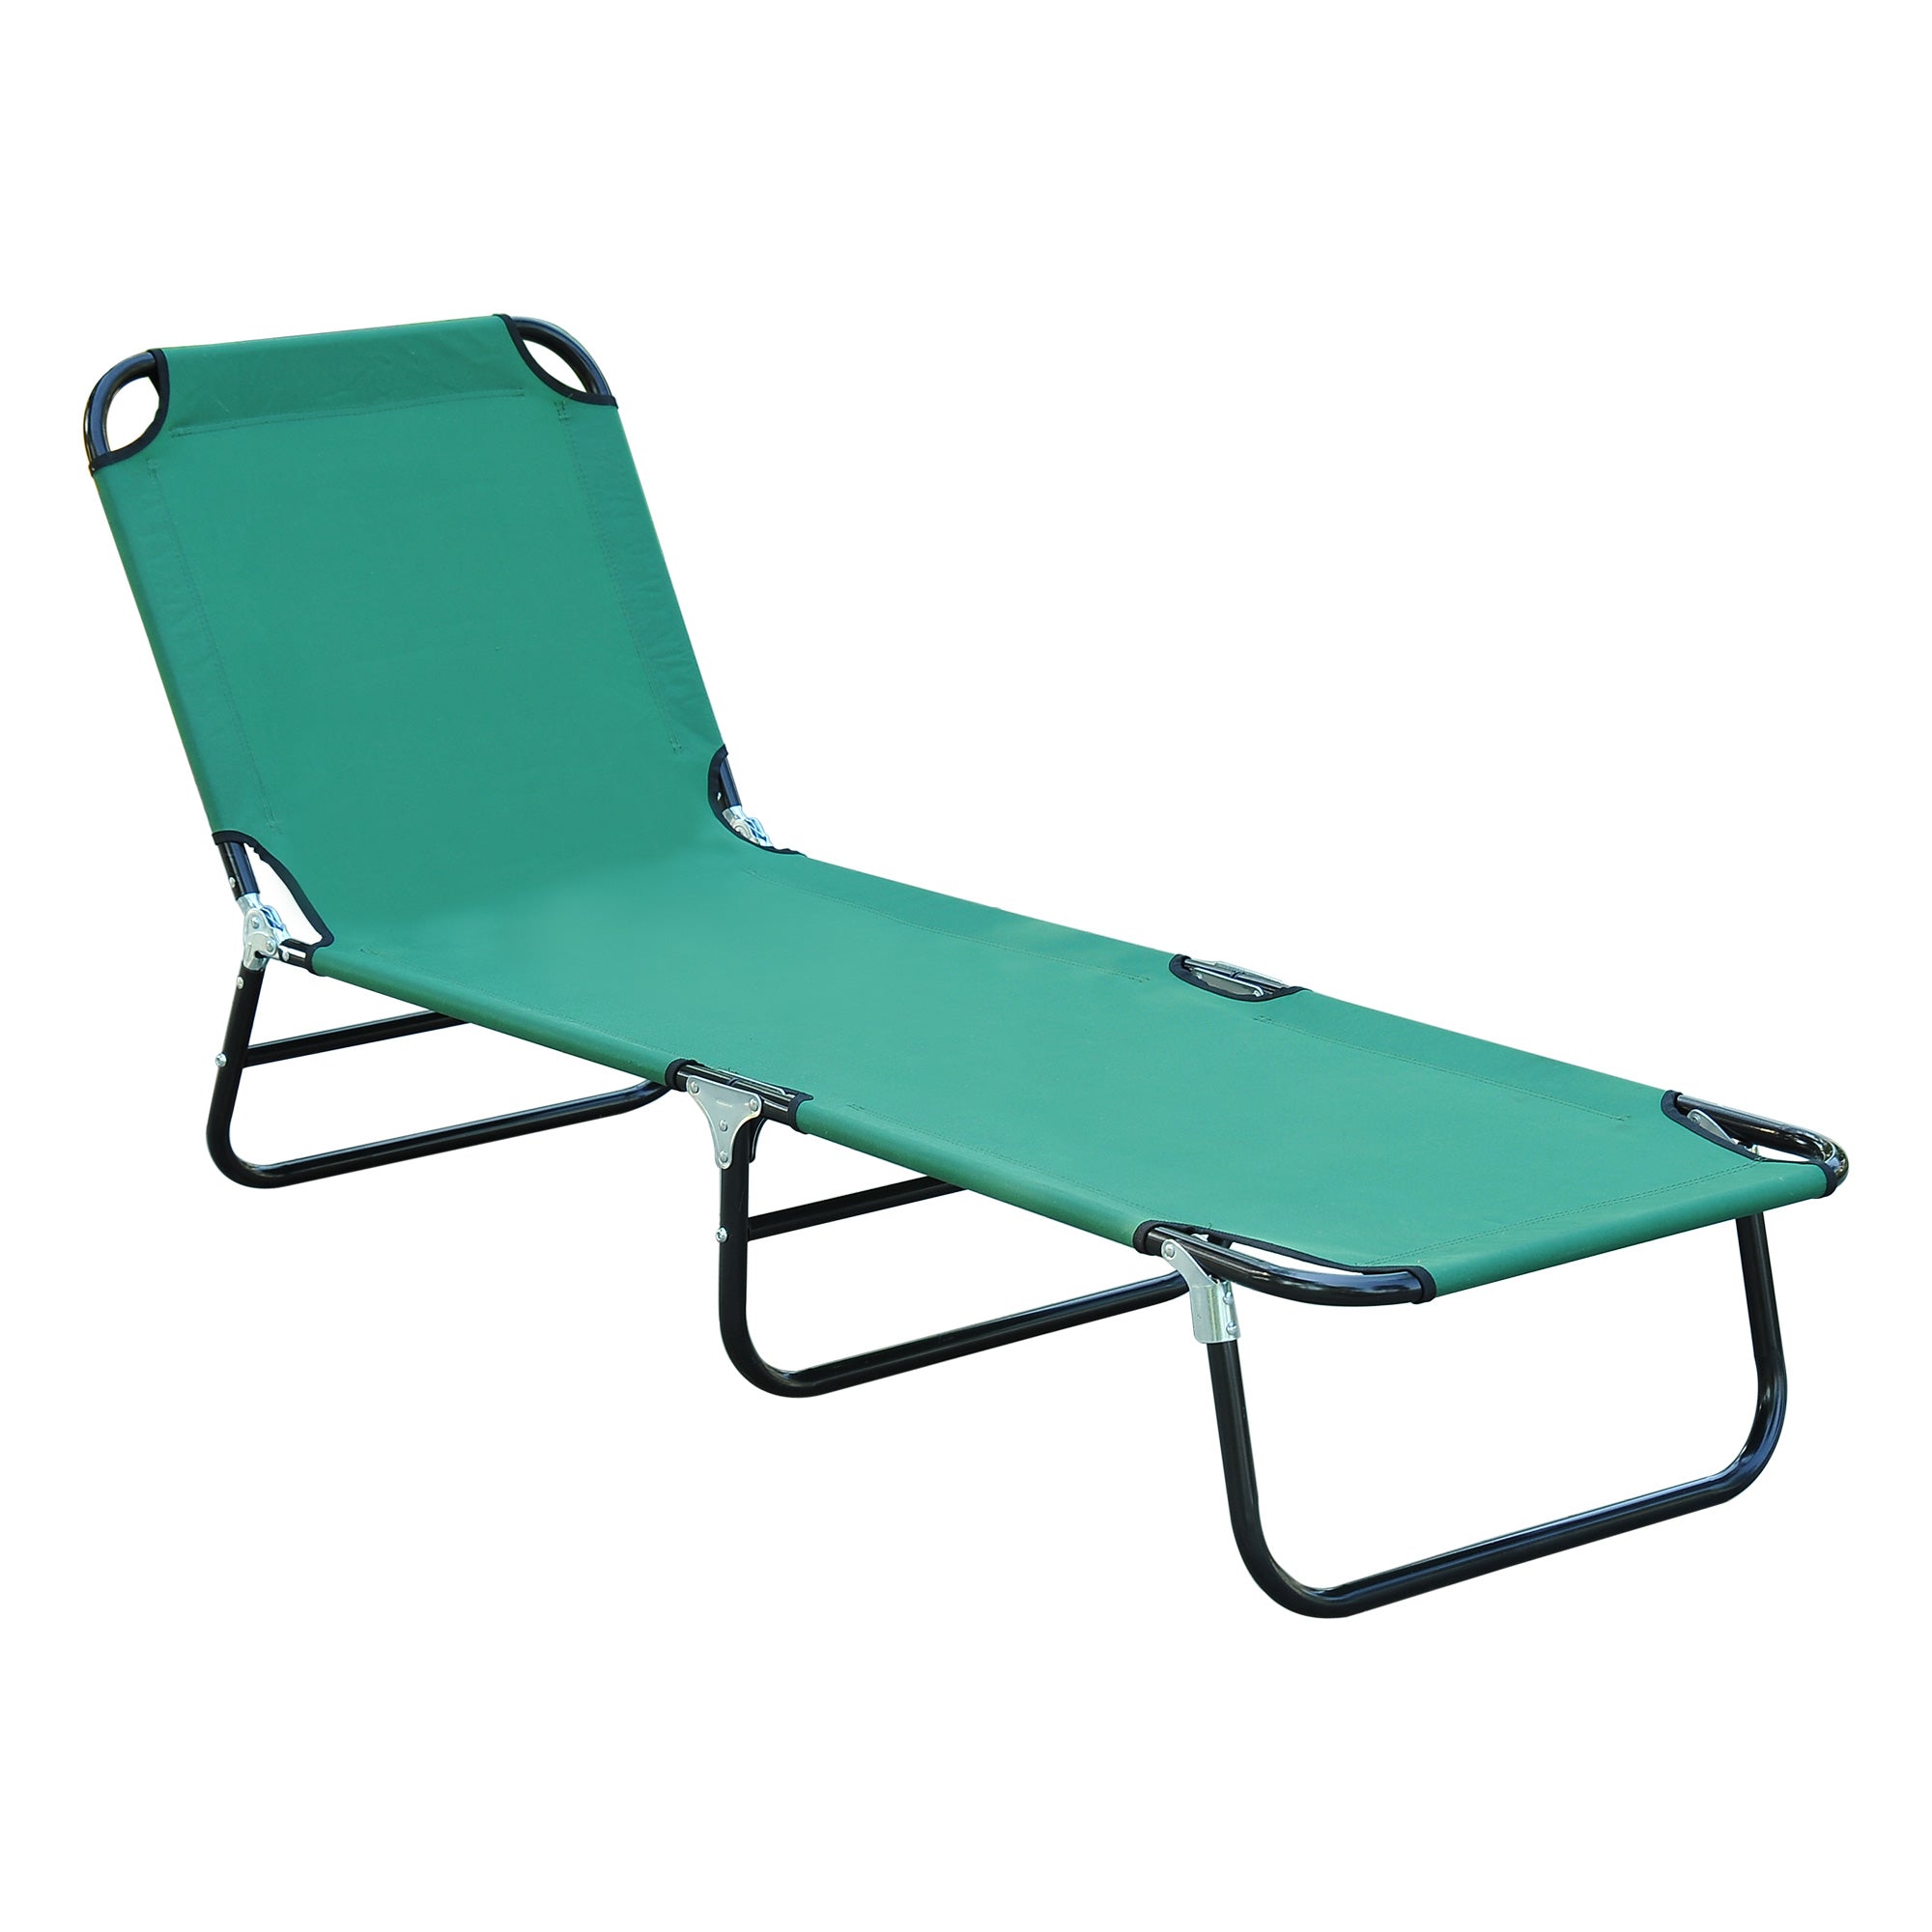 Portable Outdoor Patio Lounge Chair, Lightweight Folding Sun Chaise Lounger w/ 5-Position Adjustable Backrest for Beach, Poolside, Green